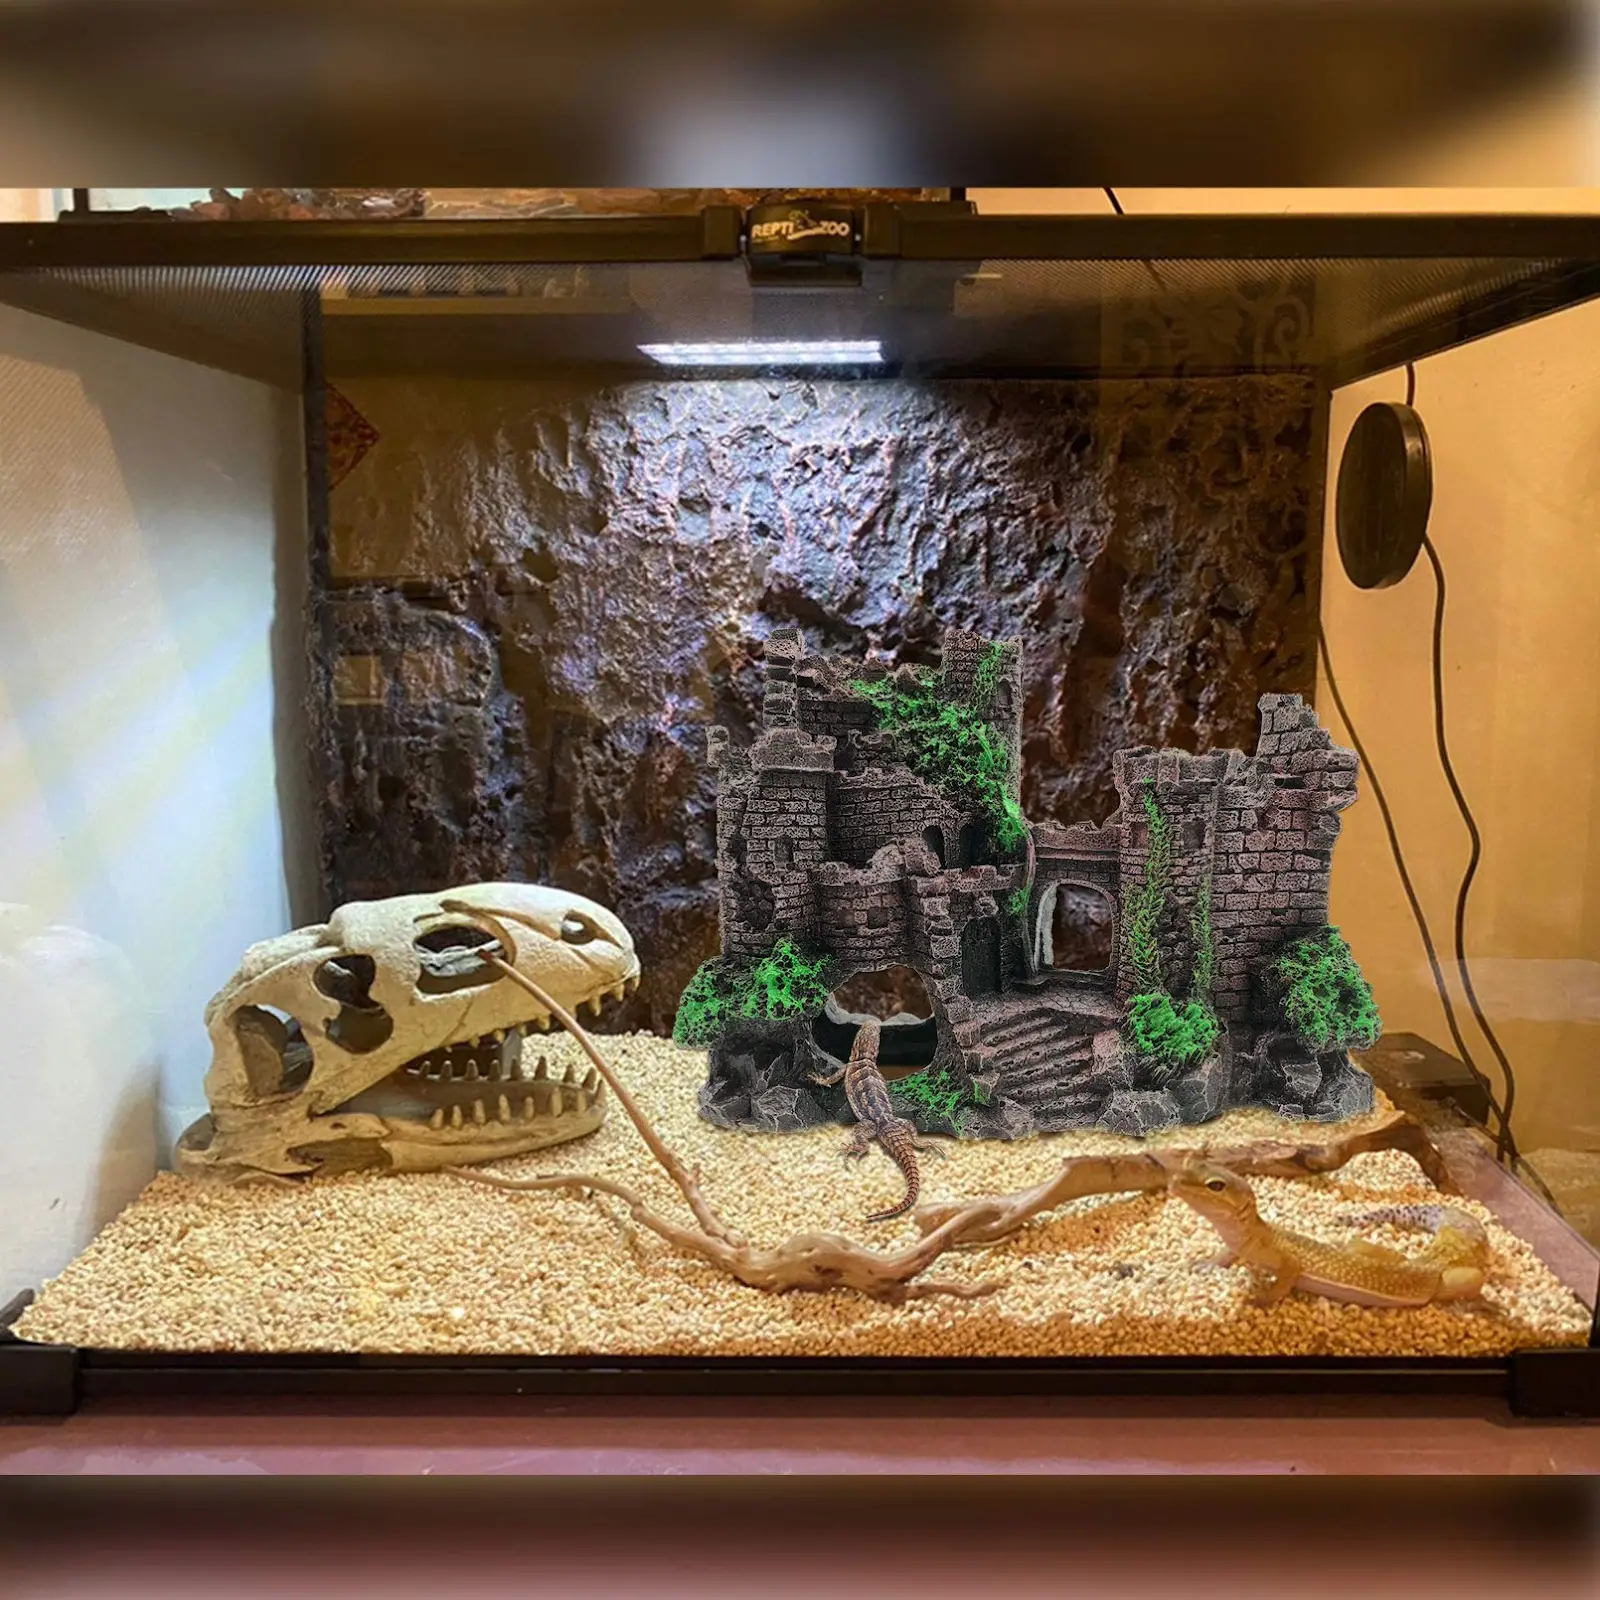 How to Lower Humidity in Your Gecko Tank